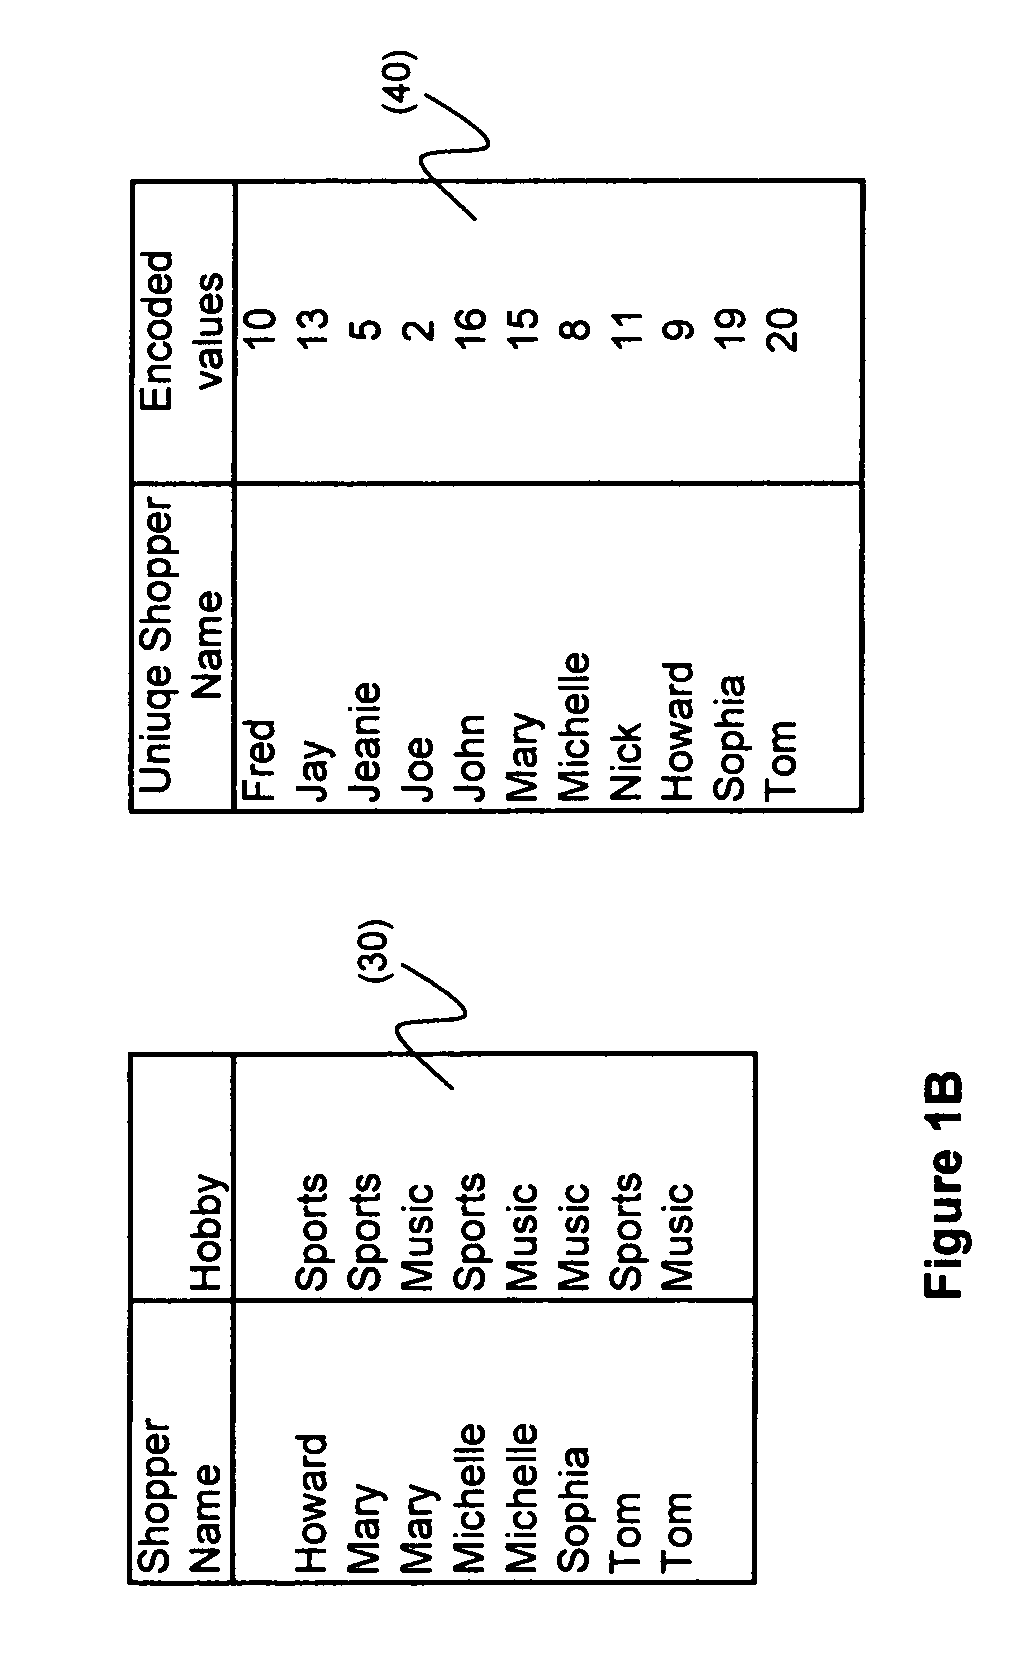 Two-level bitmap structure for bit compression and data management